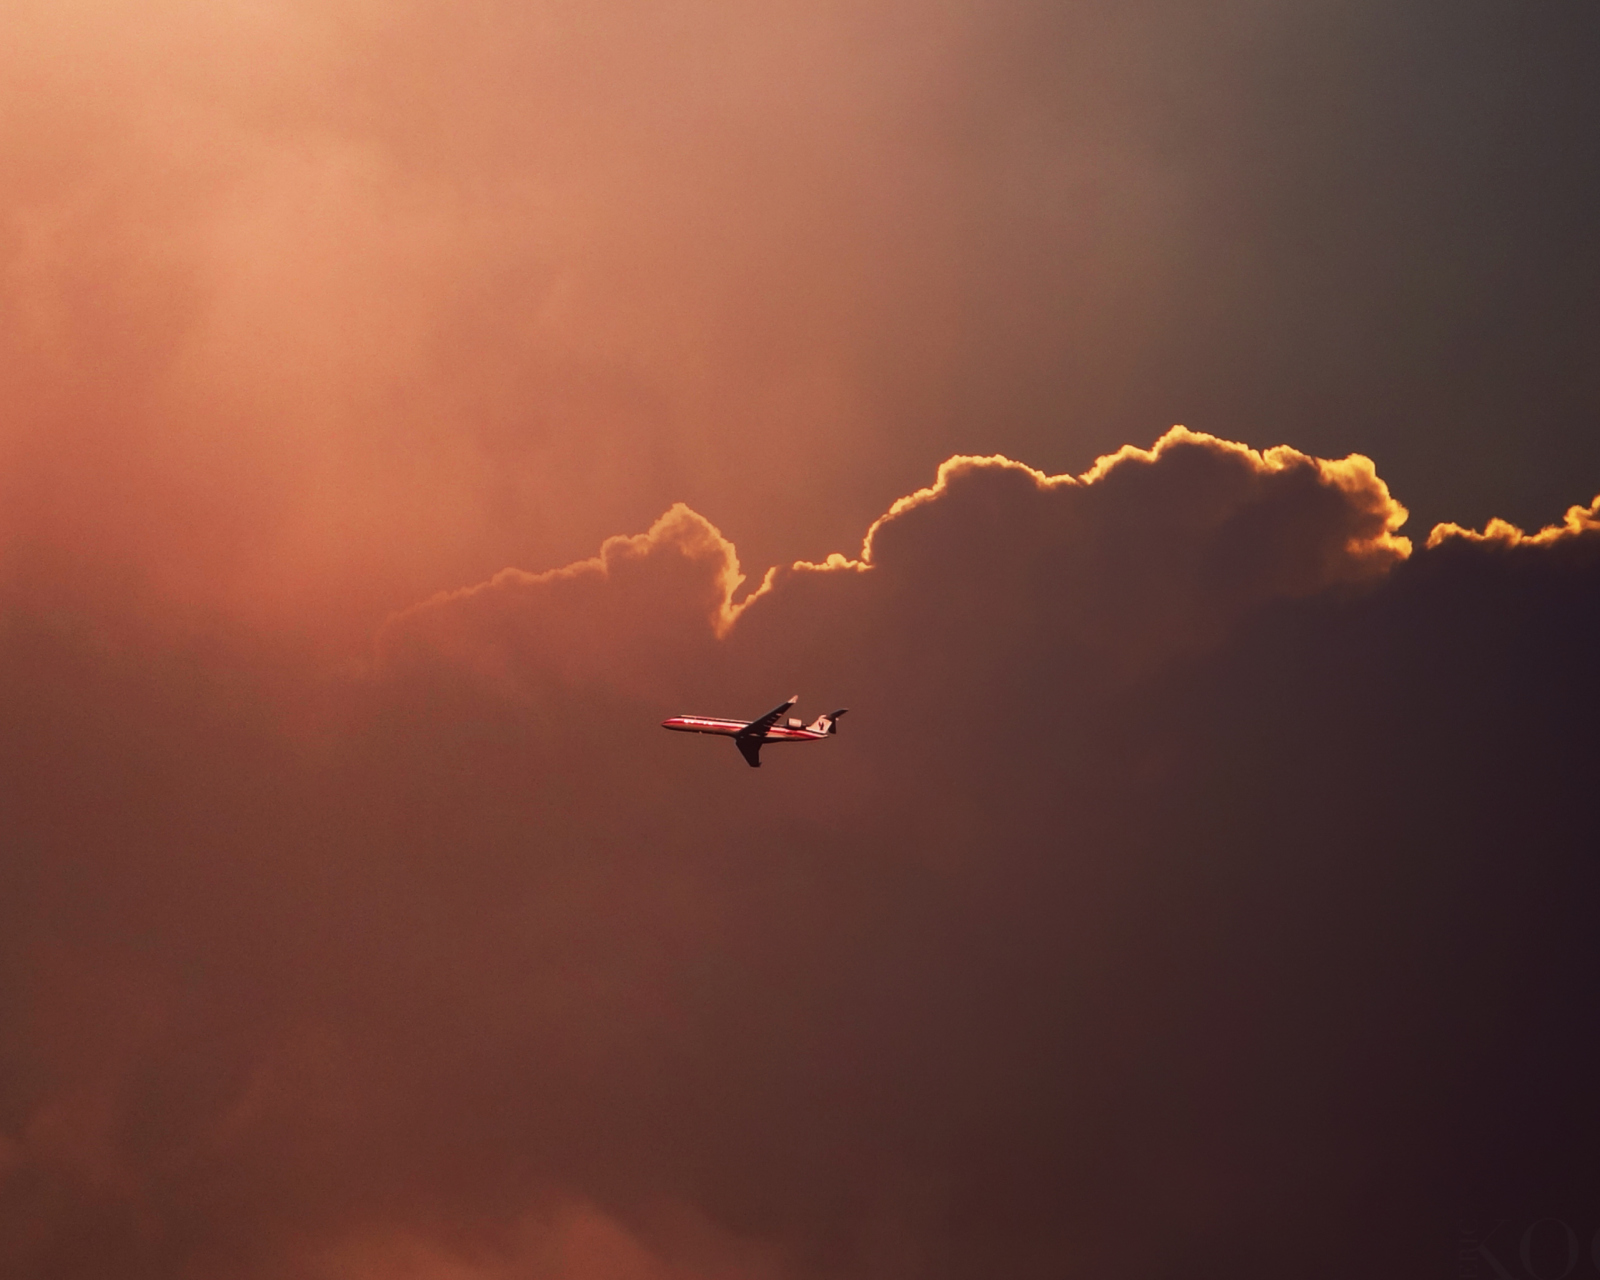 Airplane In Red Sky Above Clouds wallpaper 1600x1280